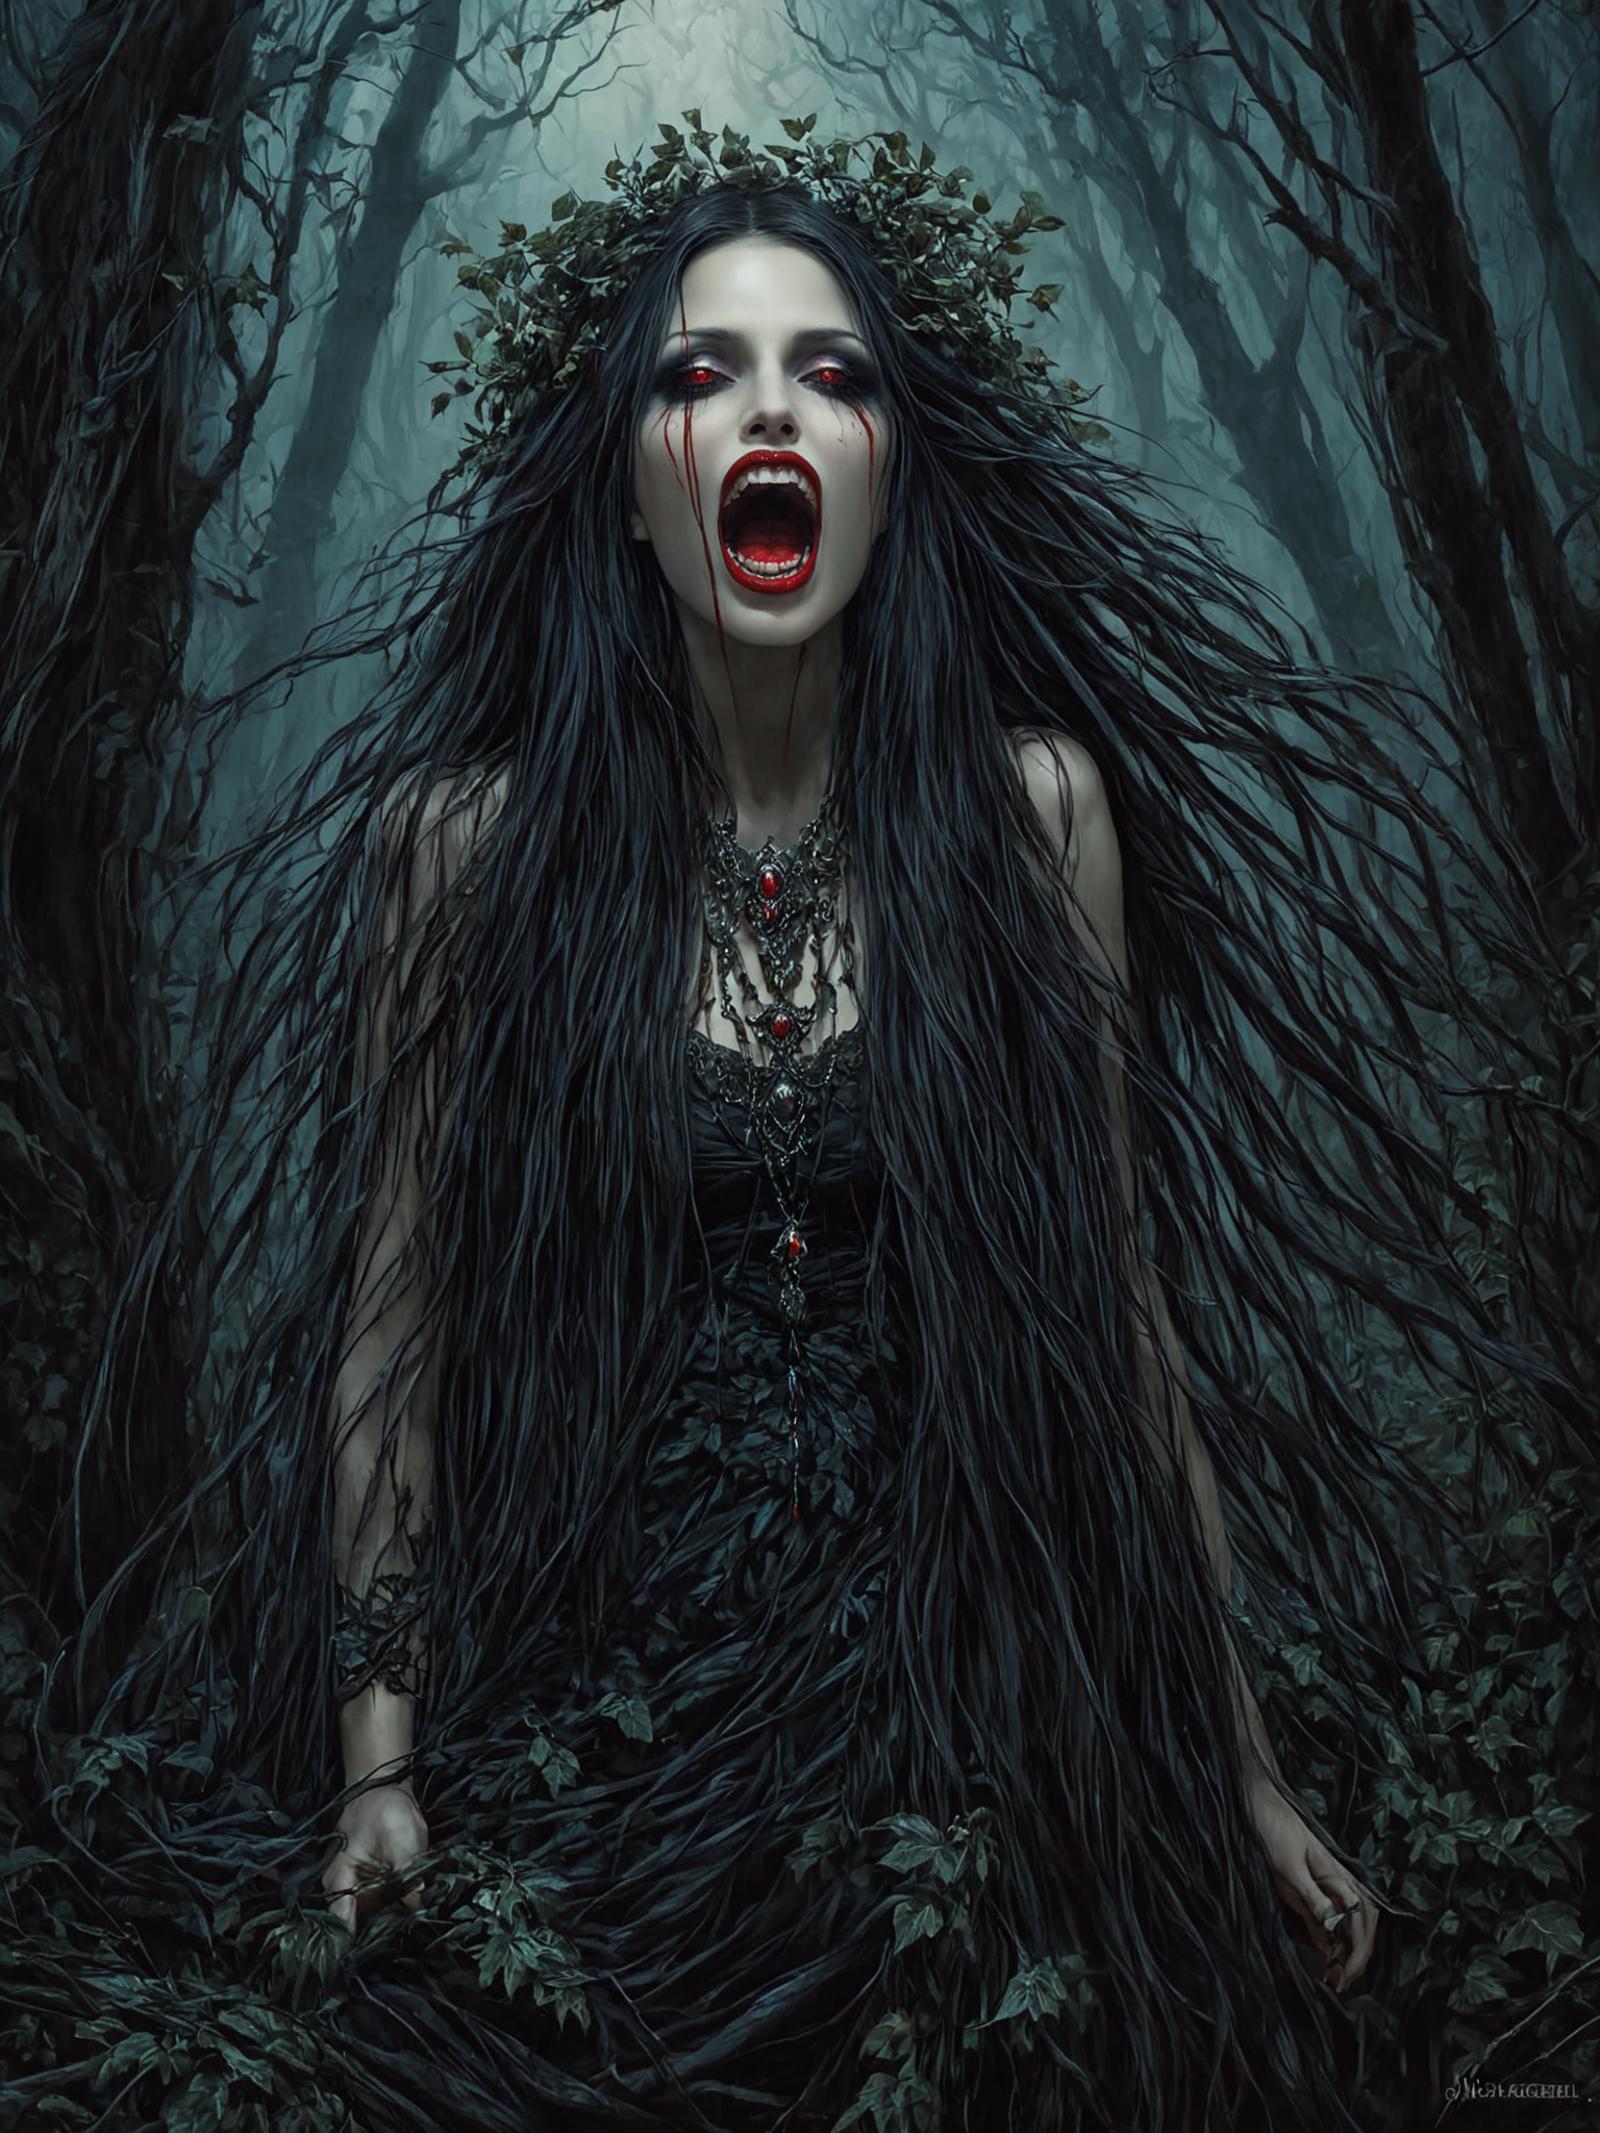 A woman with long dark hair in a black dress screaming.